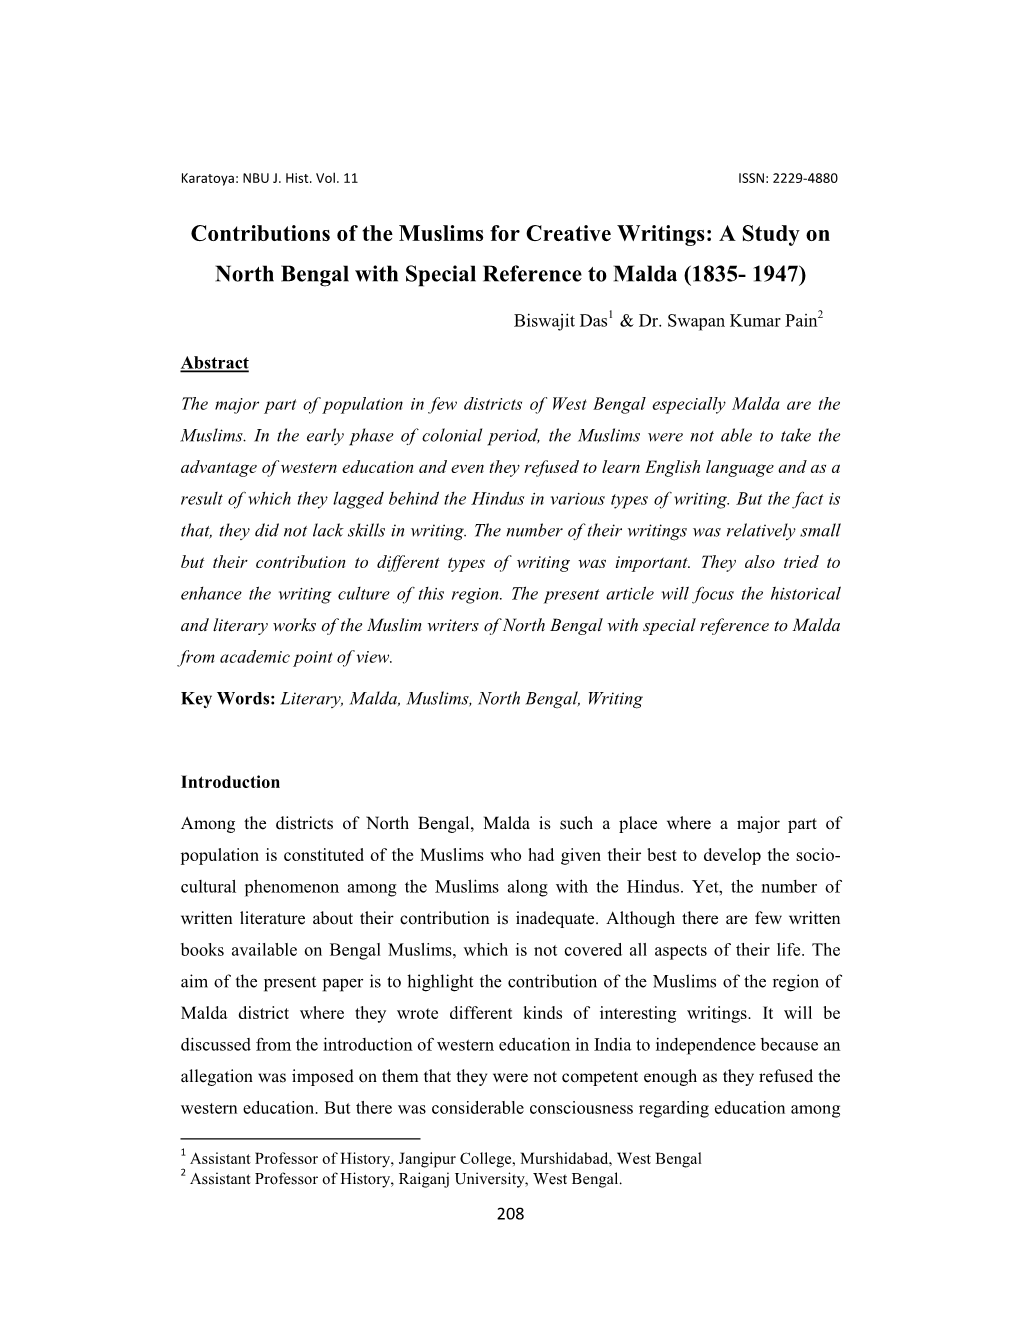 Contributions of the Muslims for Creative Writings: a Study on North Bengal with Special Reference to Malda (1835- 1947)